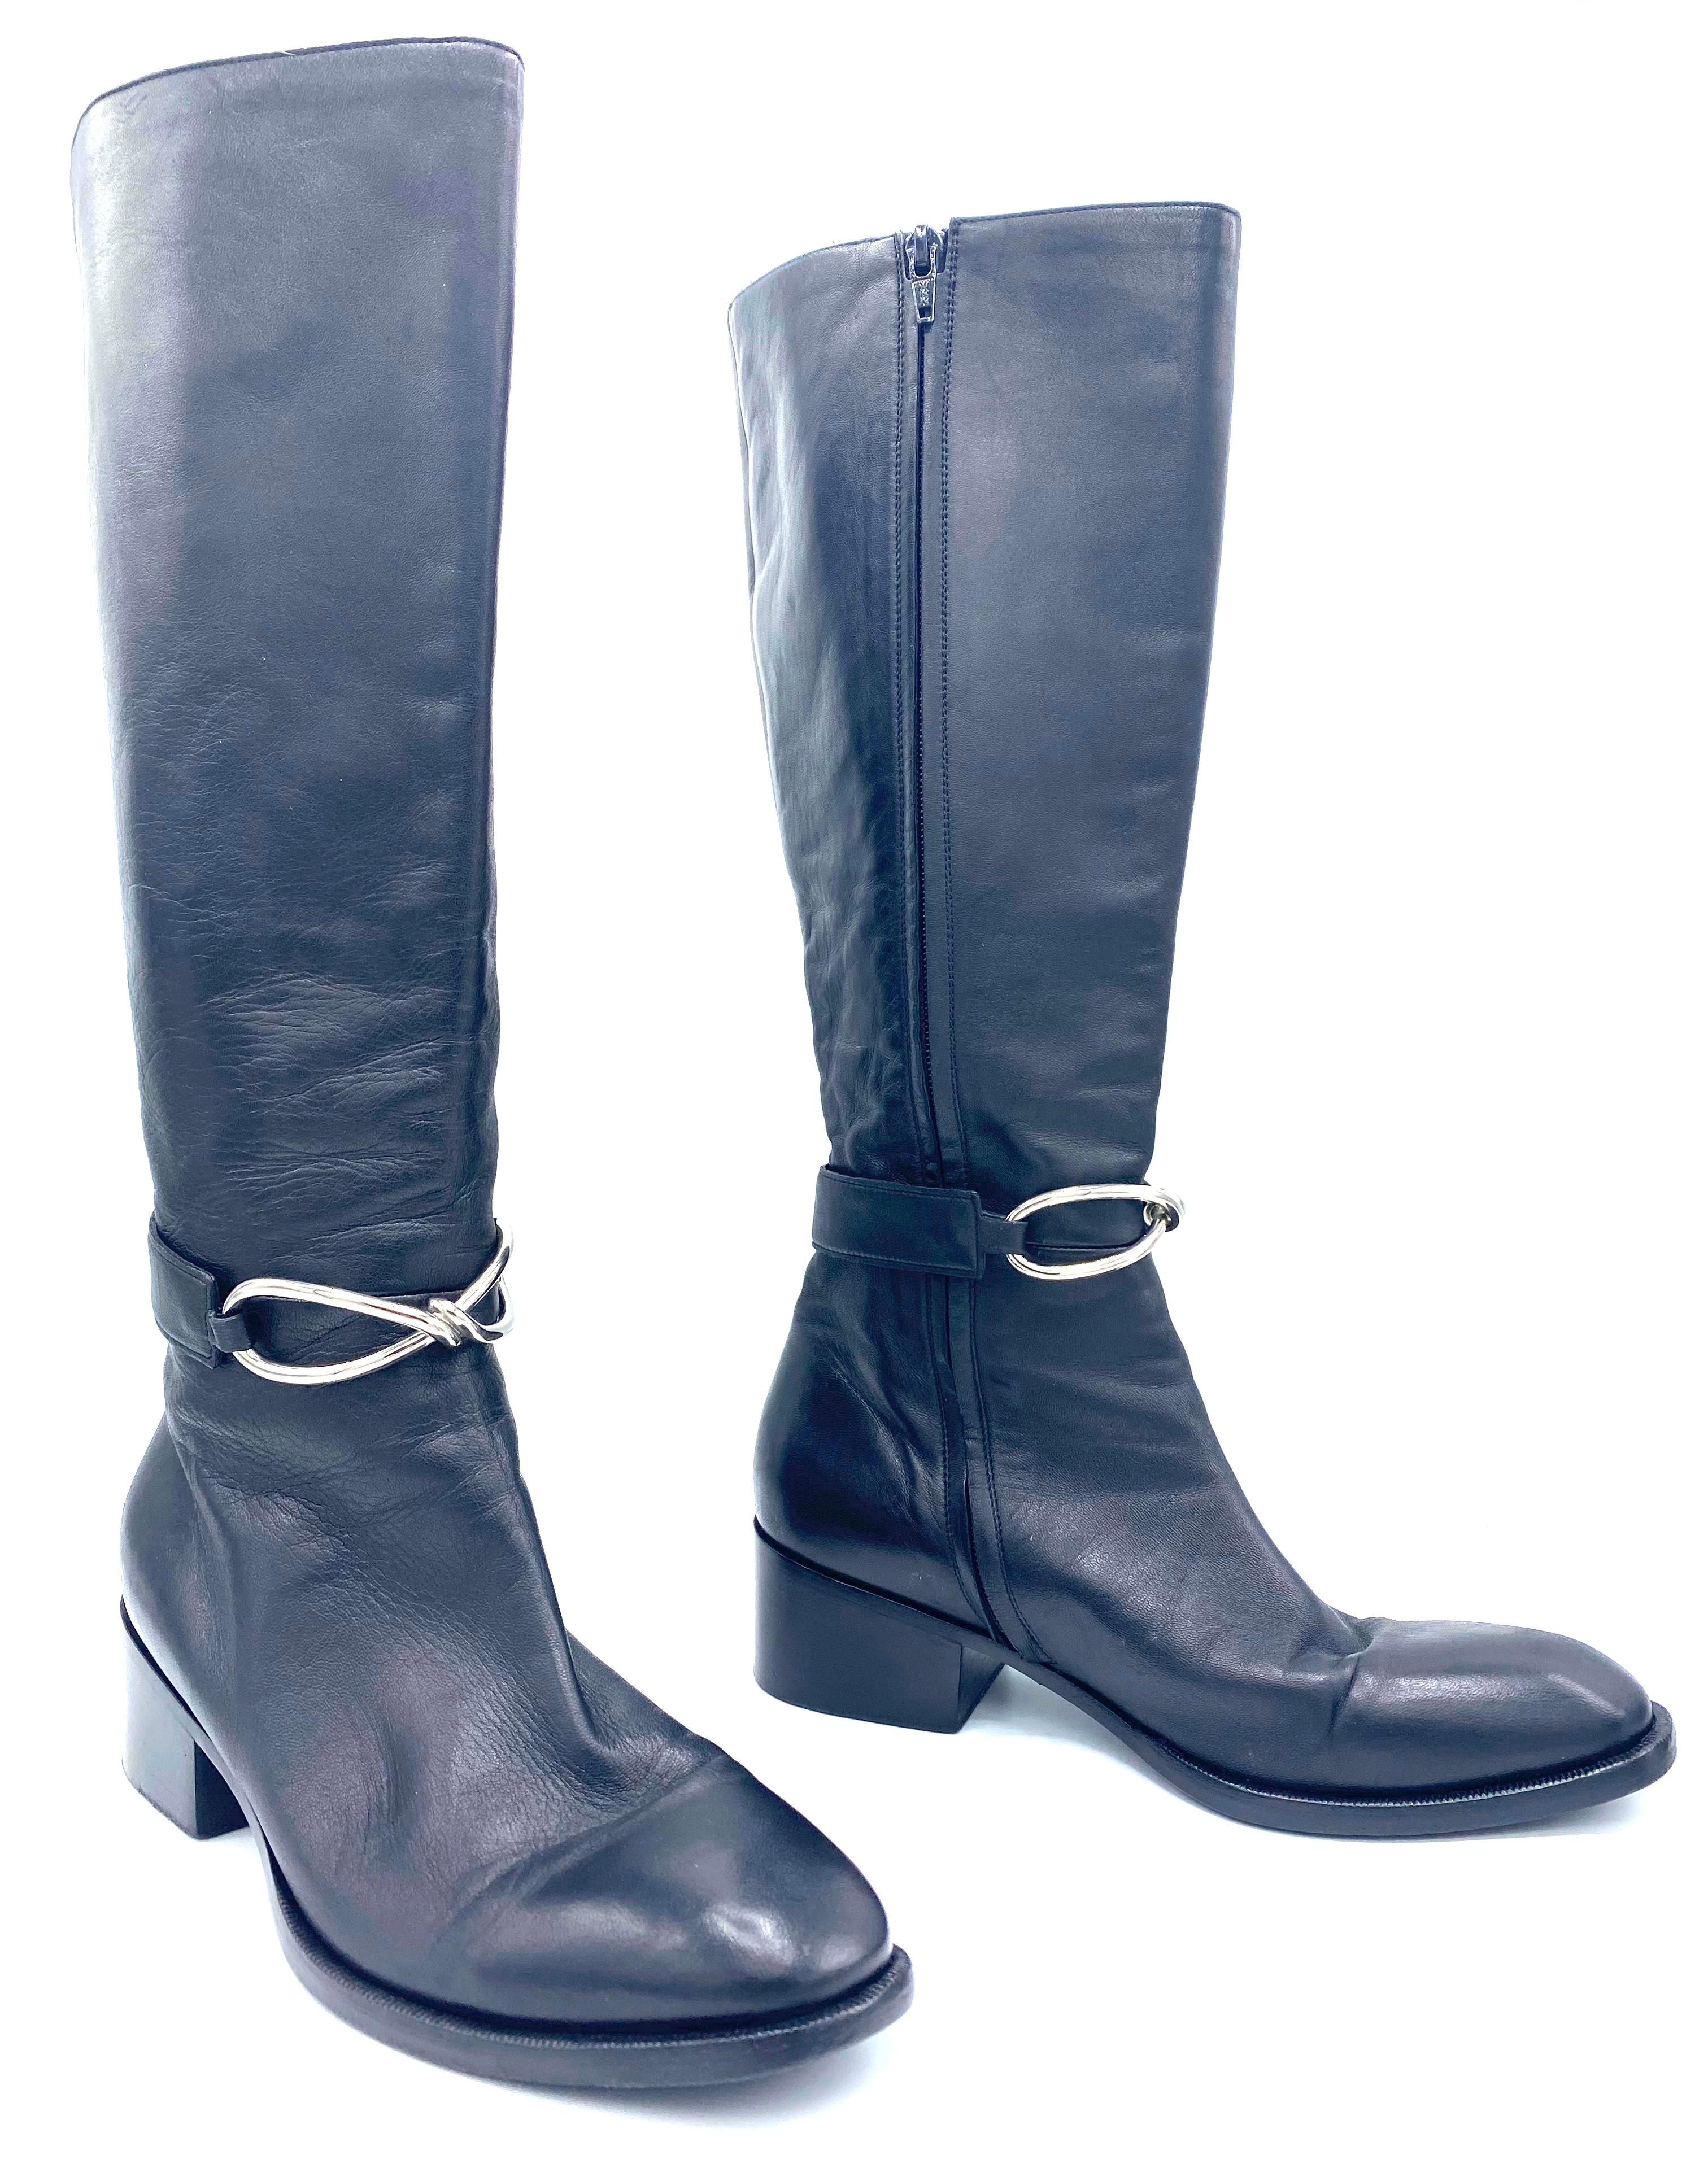 Product details:

The boots are made out of black leather, they feature silver tone hardware at the front, inside concealed closure, knee height fit and the heel height is 2 inches.